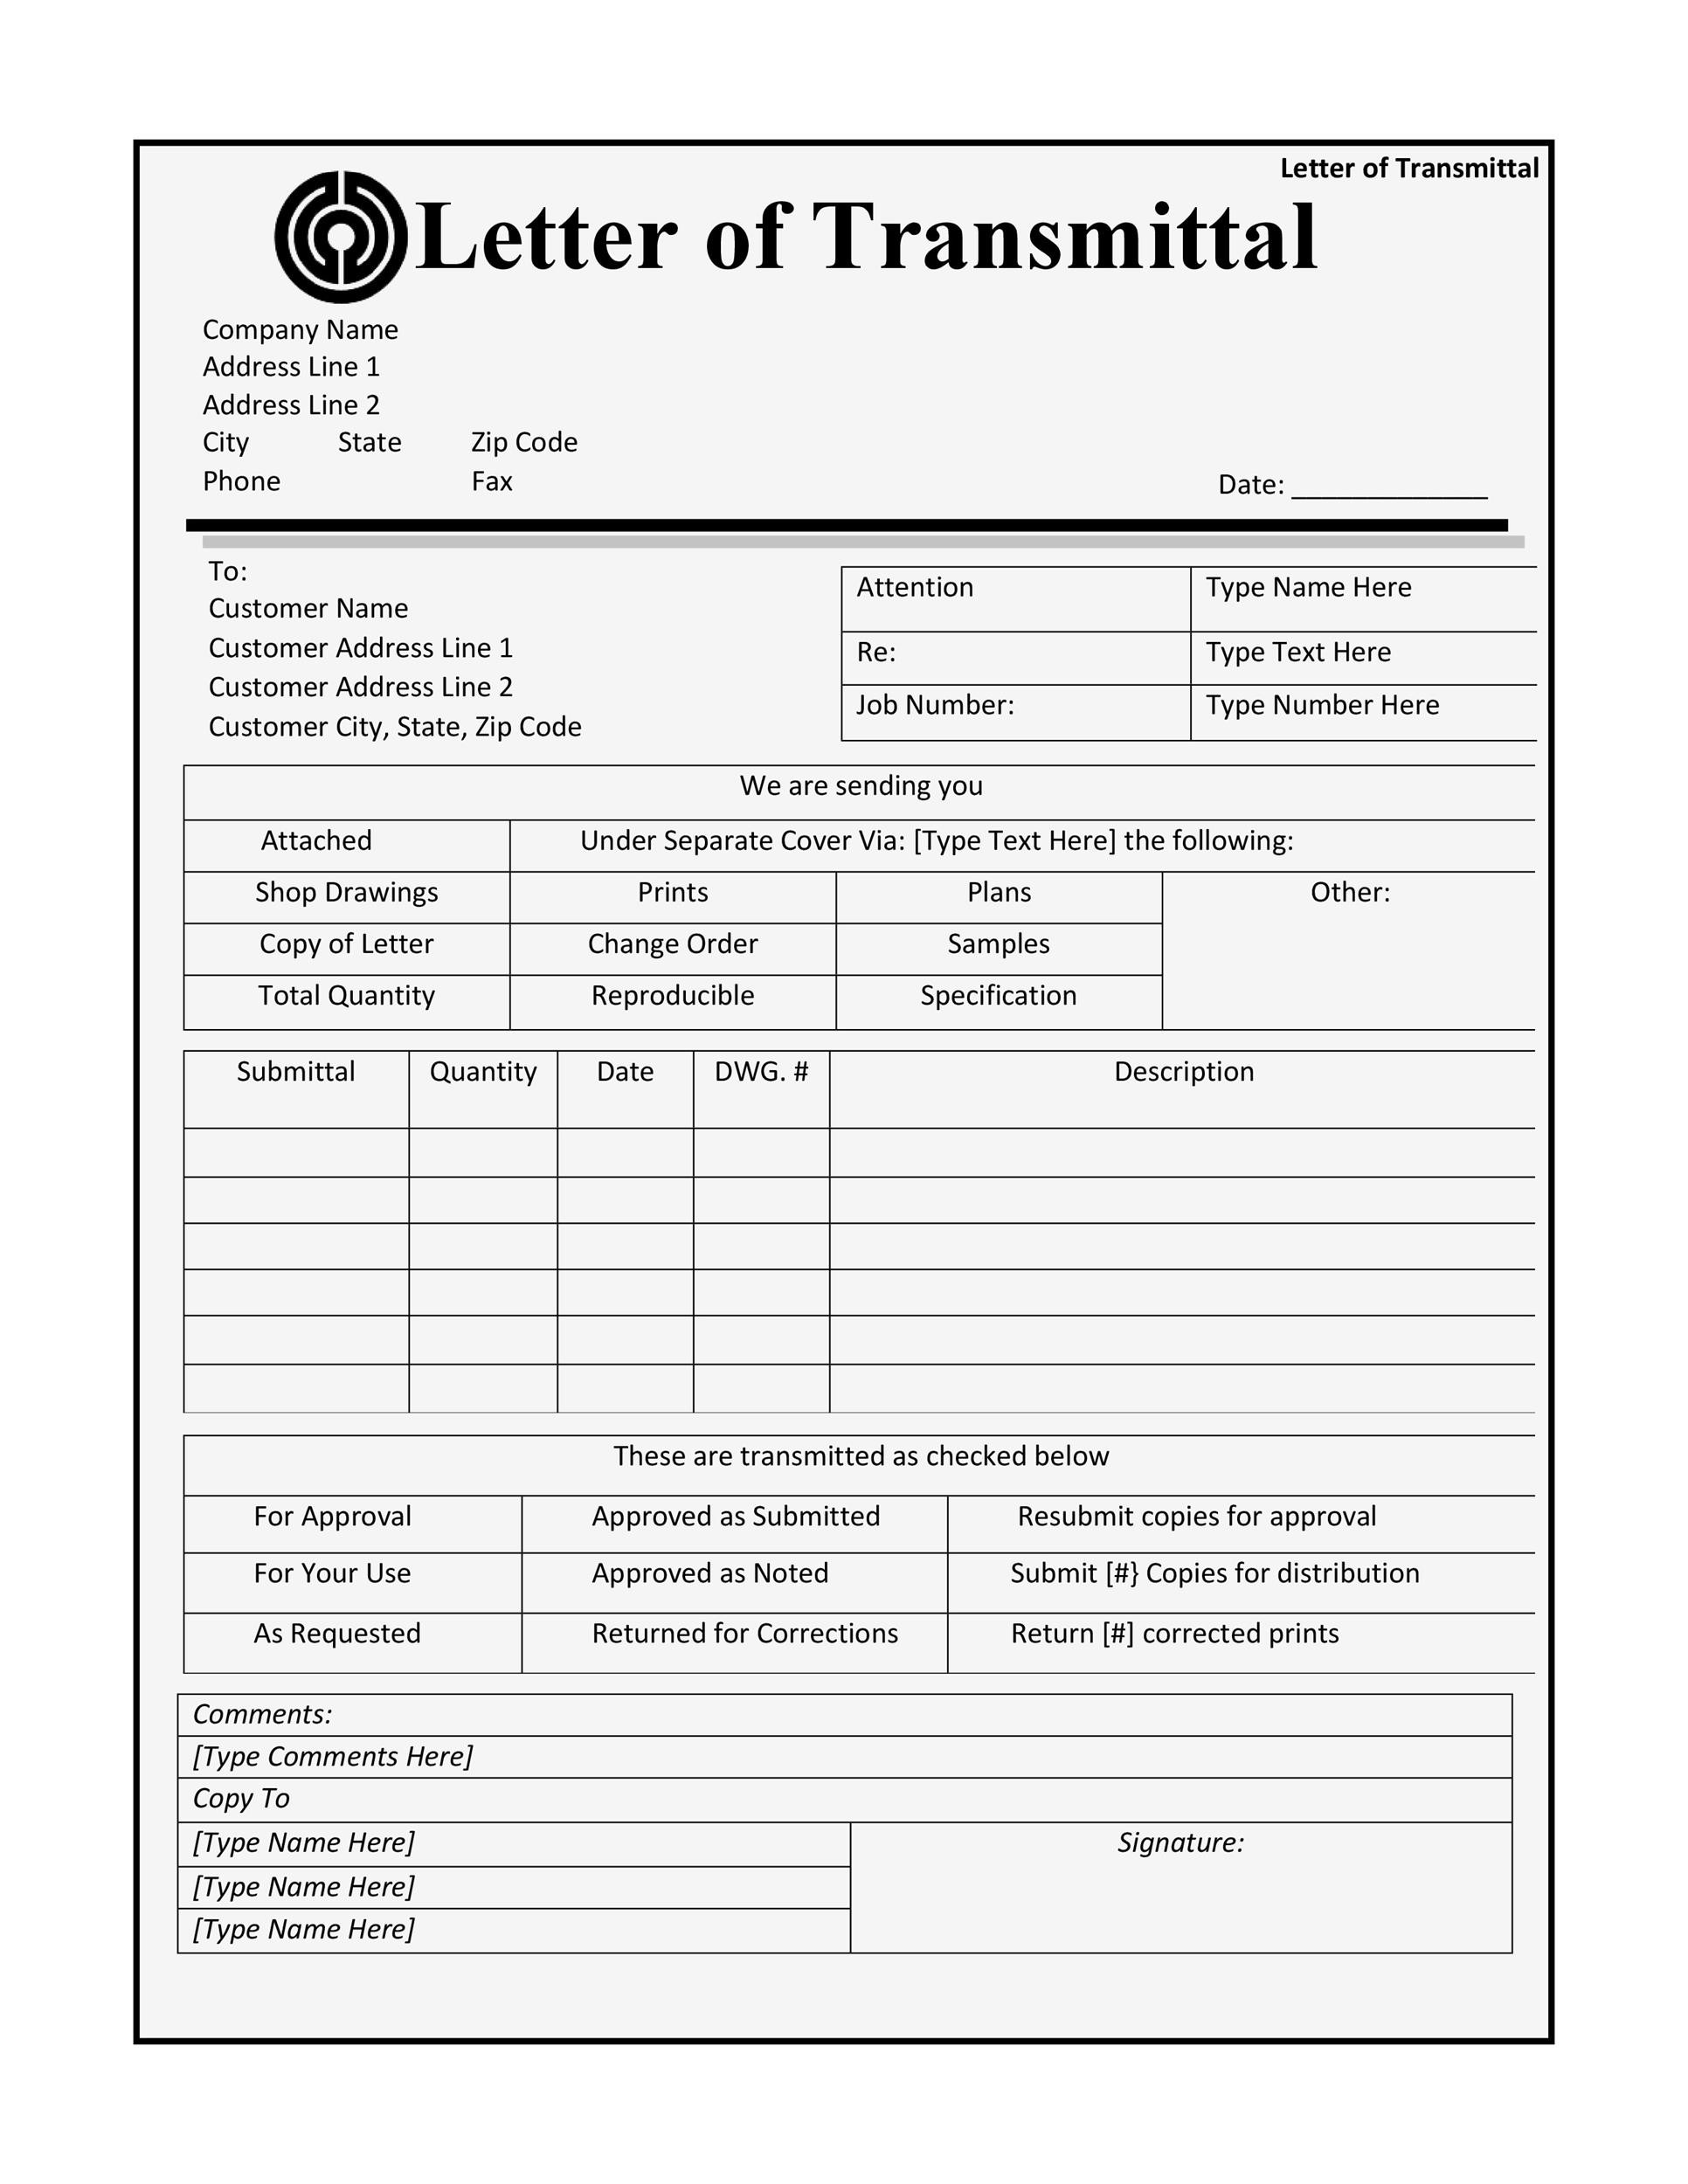 Letter of Transmittal 40+ Great Examples & Templates ᐅ TemplateLab